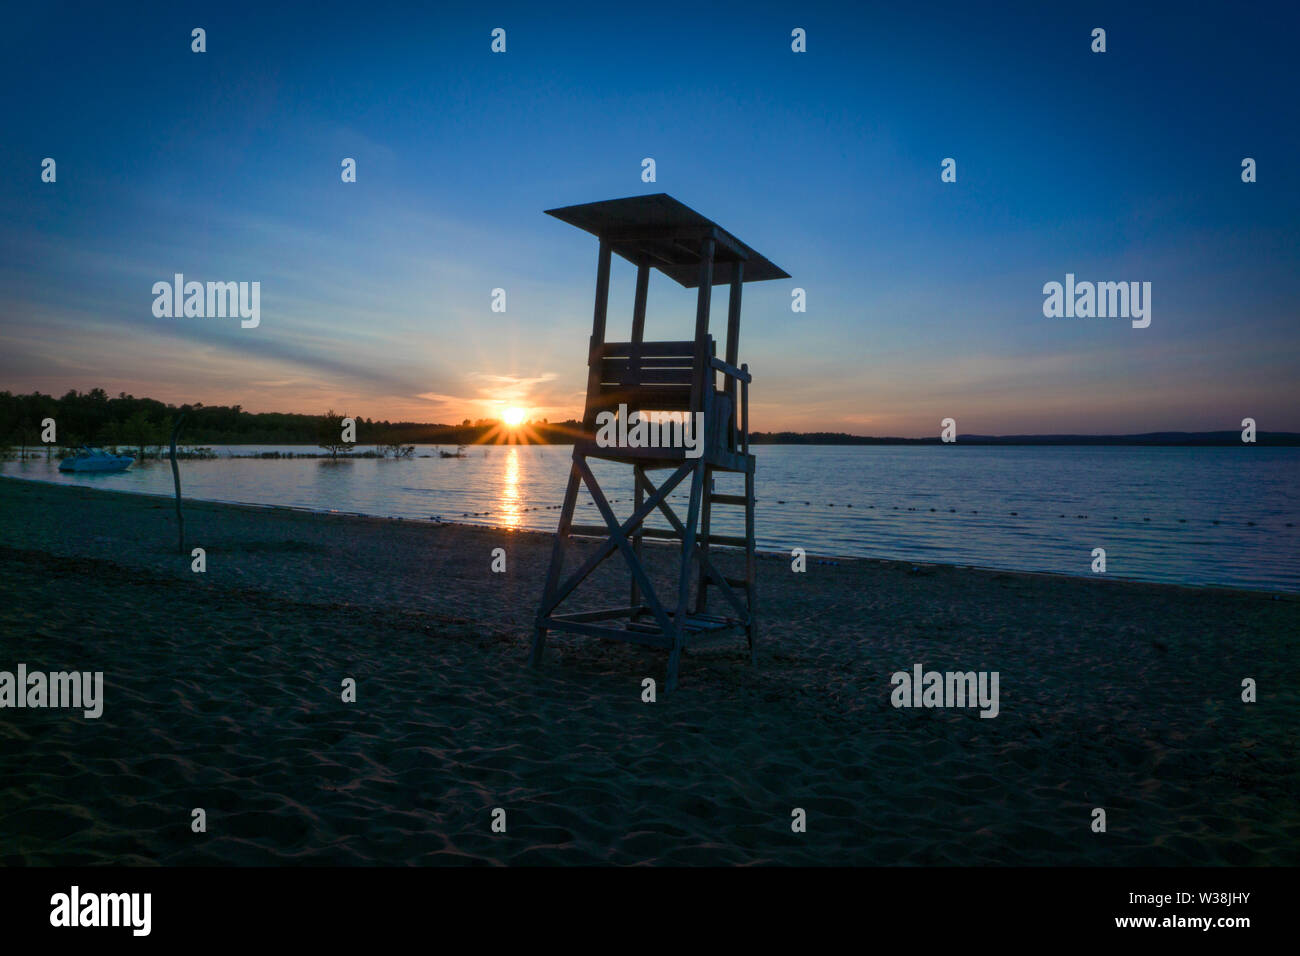 Black Bear Beach, Canada, Petawawa, In the foreground a rescue tower, Silence Stock Photo